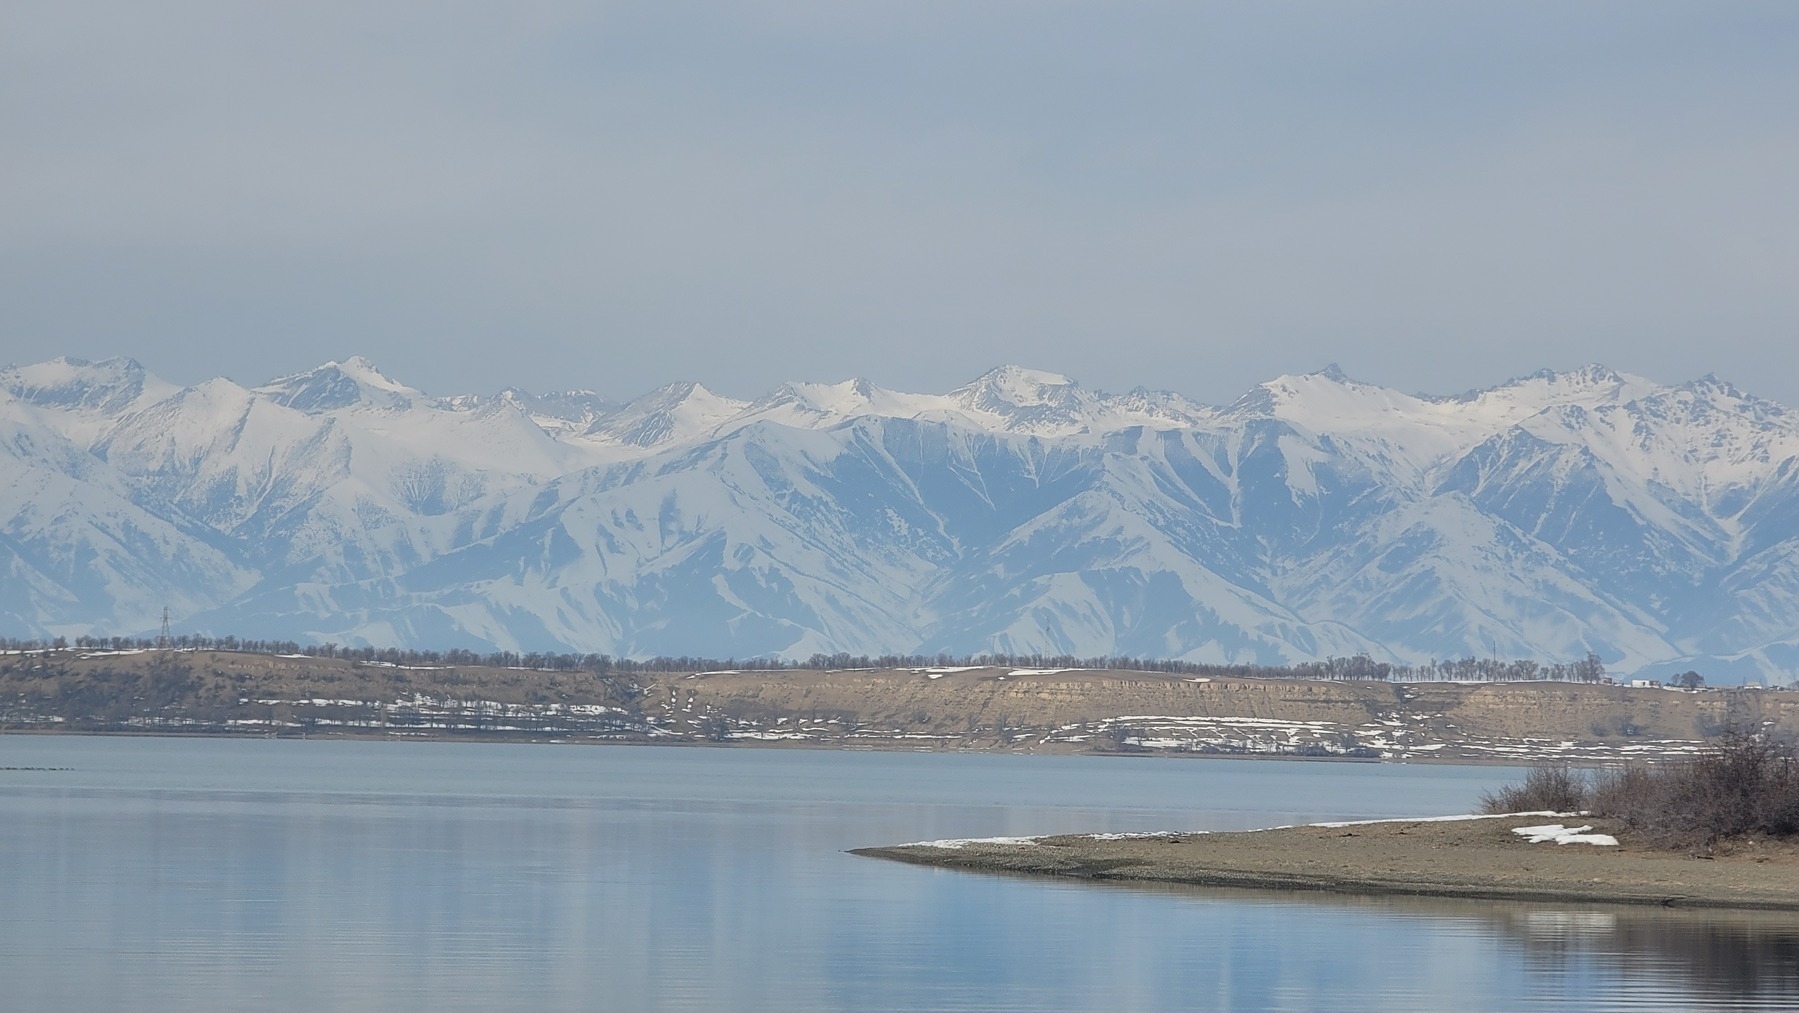 light gray-blue lake next to a brown shore with snow-capped mountains in the background